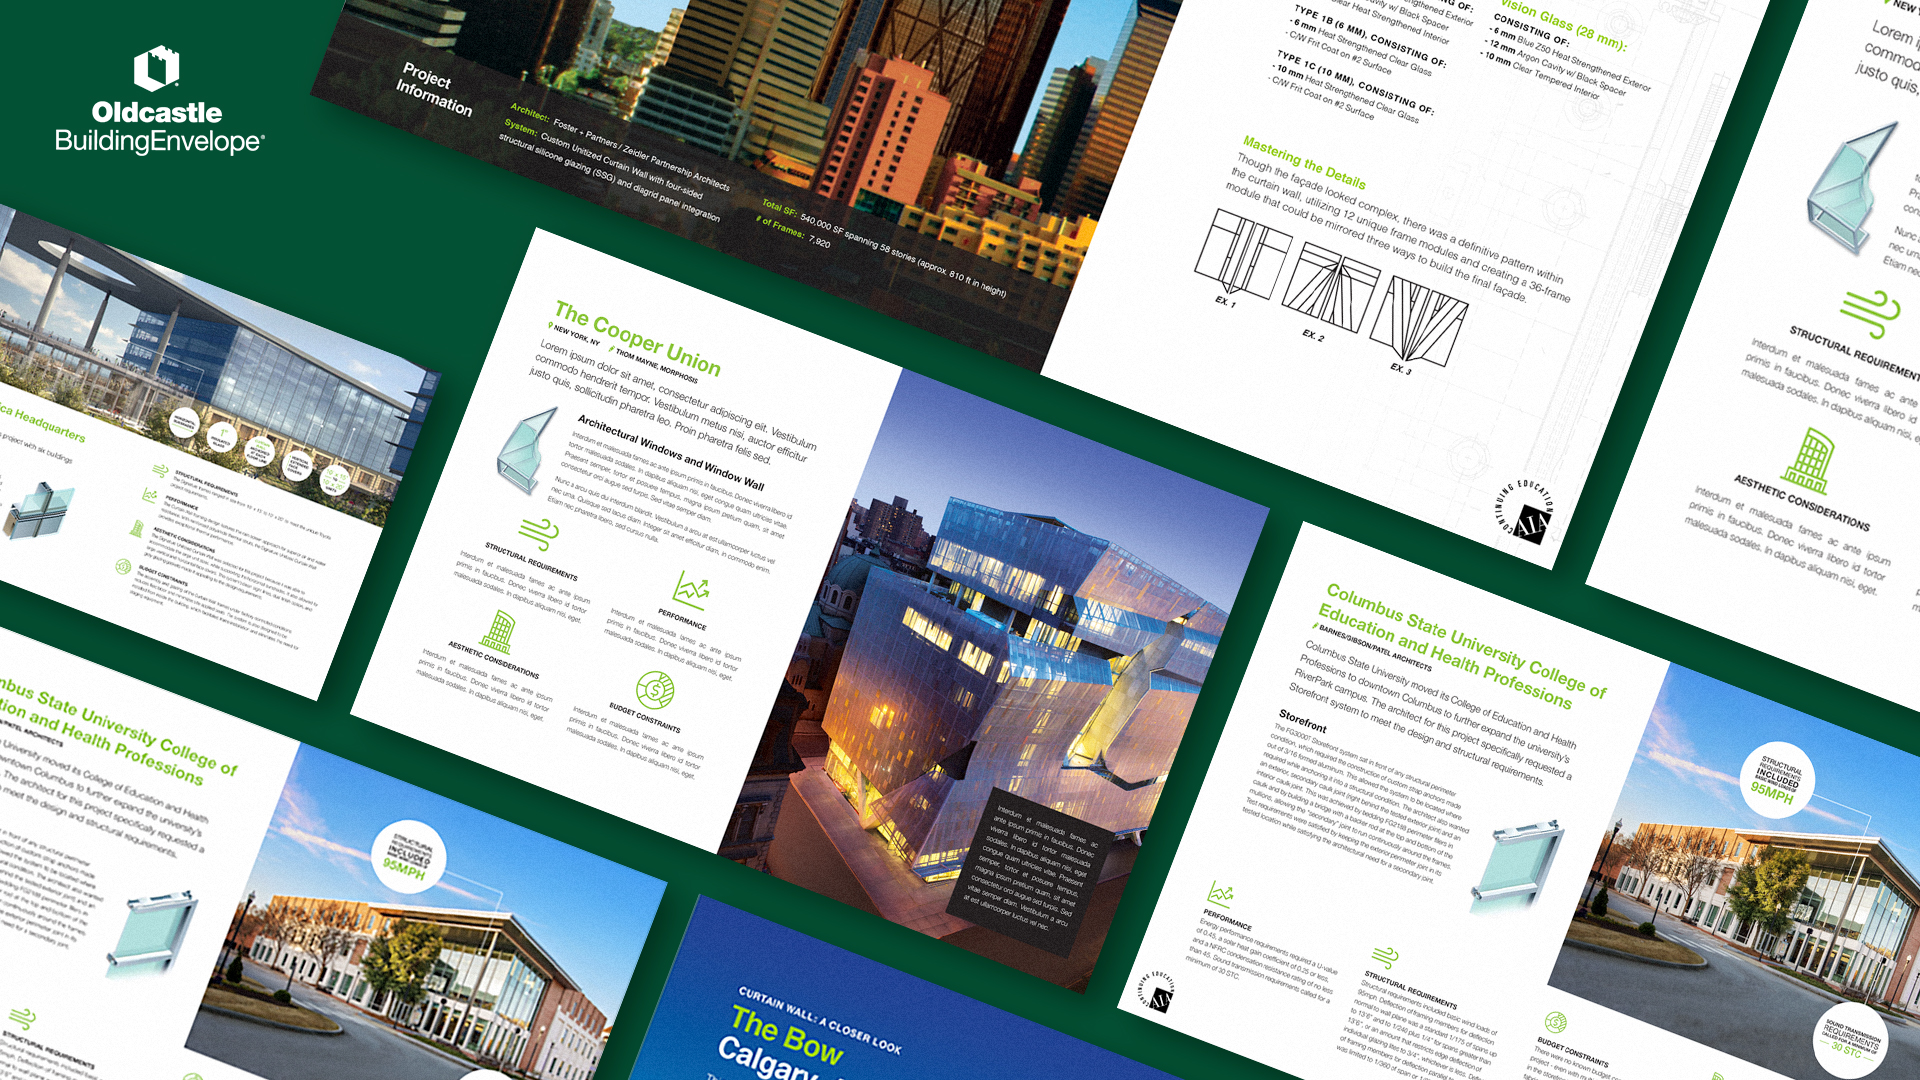 <strong>Oldcastle Building Envelope (OBE) – Infographic Case Studies</strong><small>An on-demand resource as part of OBE’s continuing education platform, these infographic-style case studies provided a visually-engaging profile of standout architectural projects, highlighting the various glazing solutions that were integrated.</small>